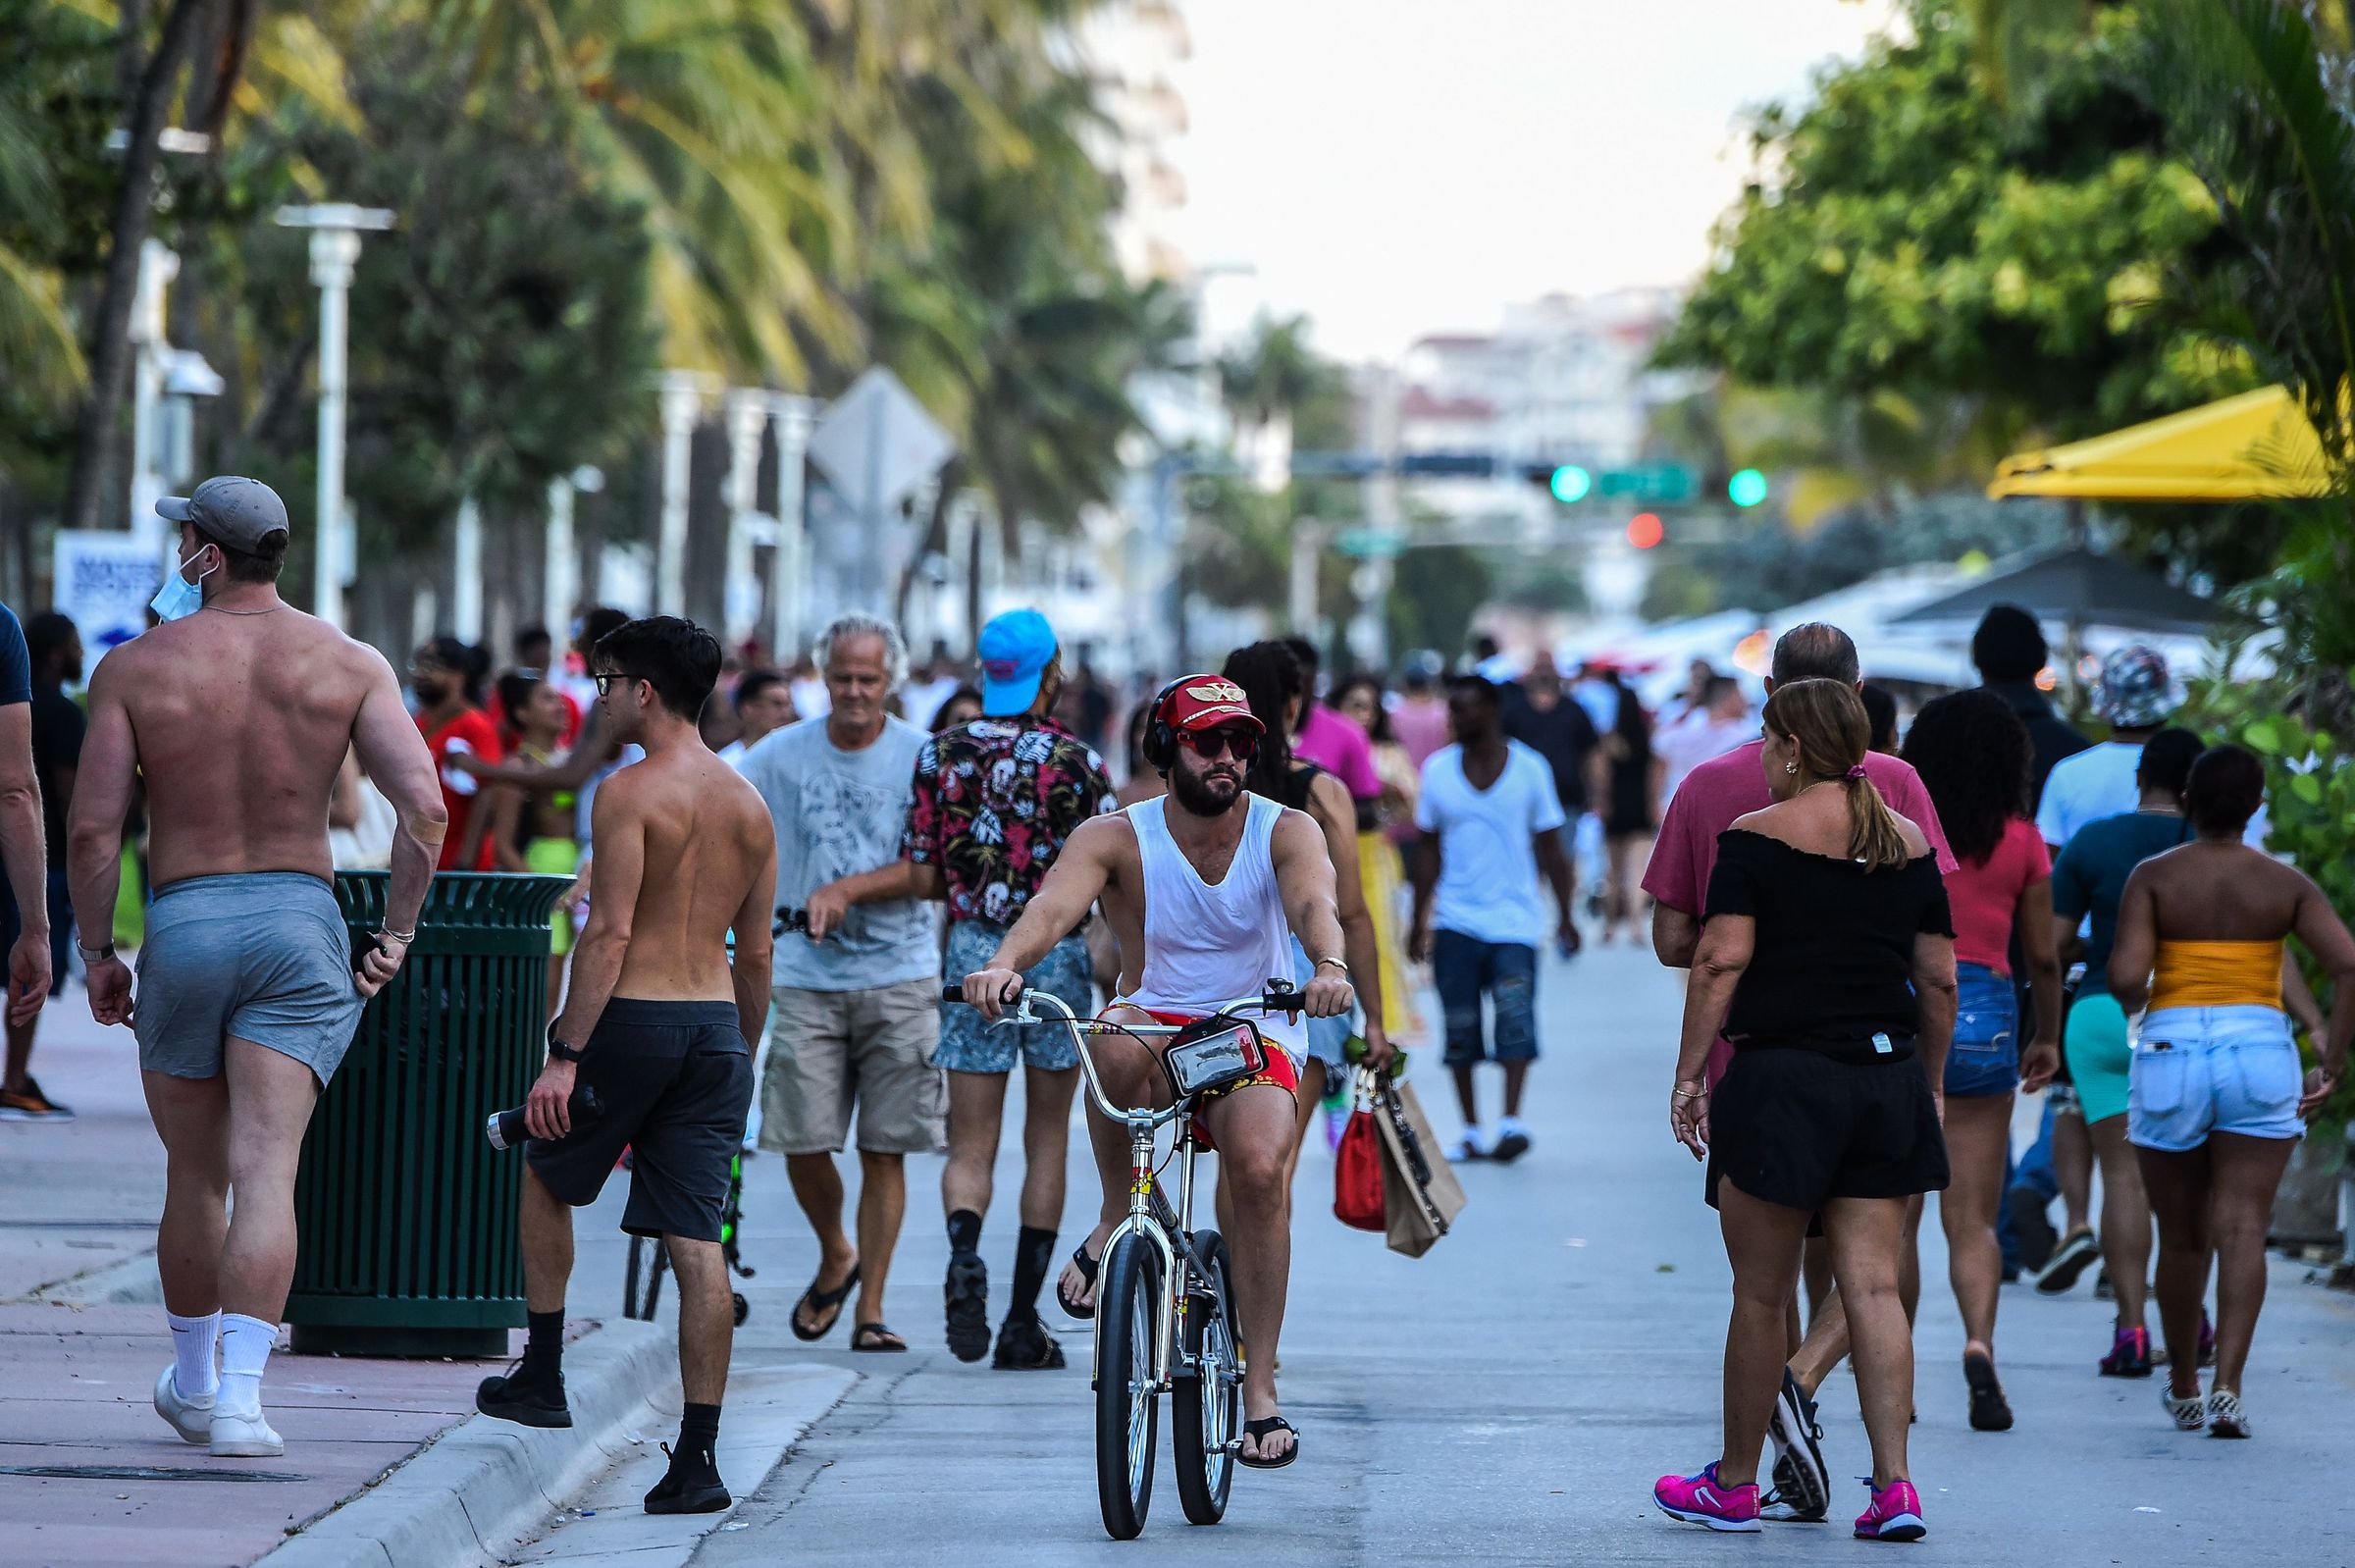 crowds of people walking in Florida, all without masks